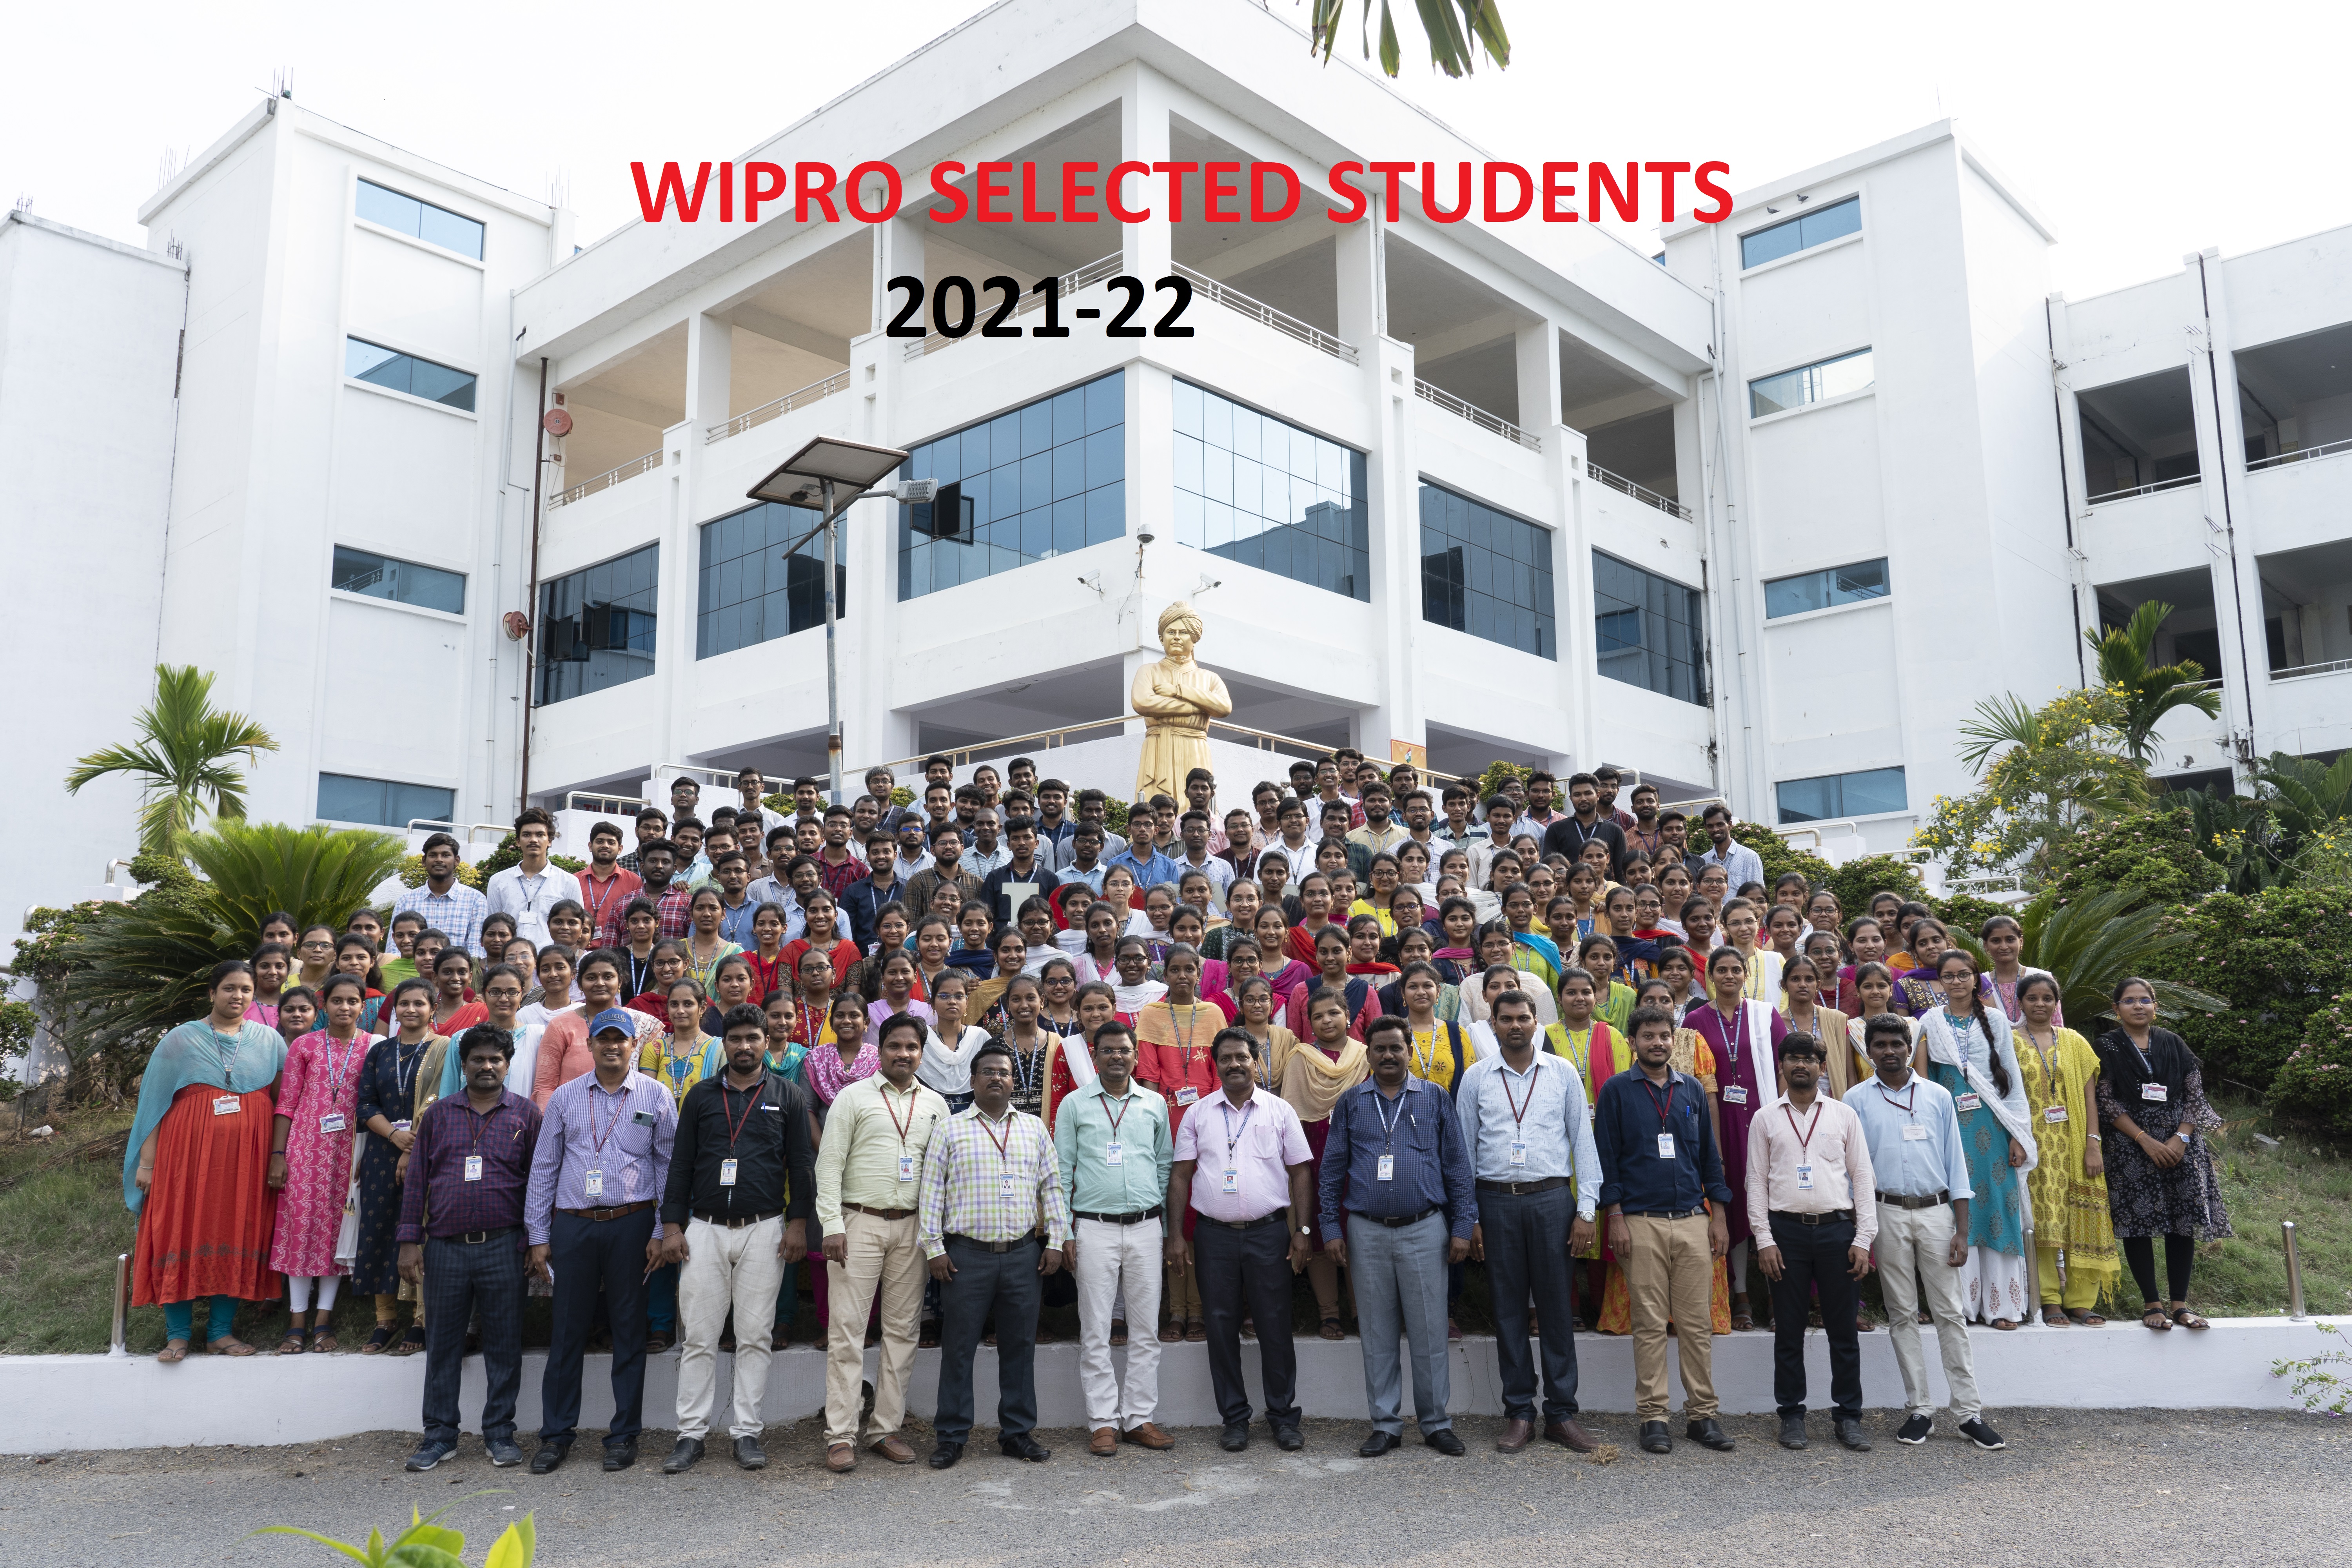 2021-22 WIPRO SELECTED STUDENTS 